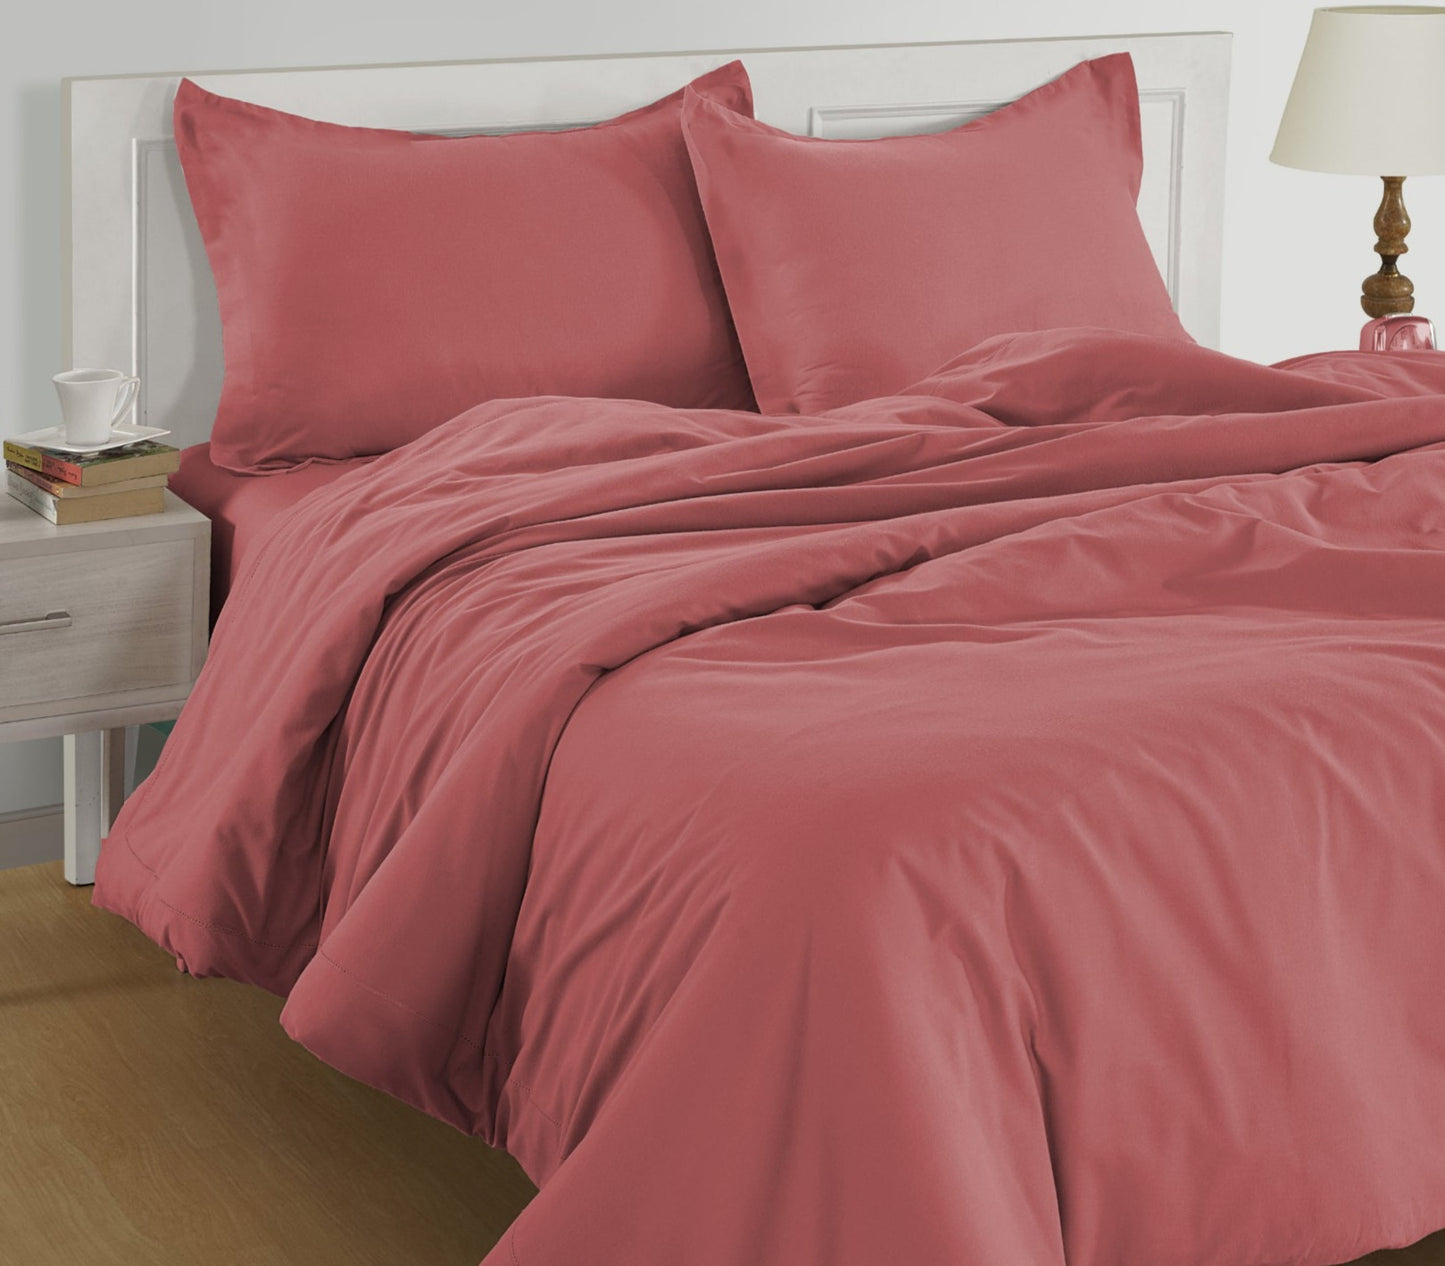 100% Organic Washed Cotton  Quilt Cover Set - Red Violet